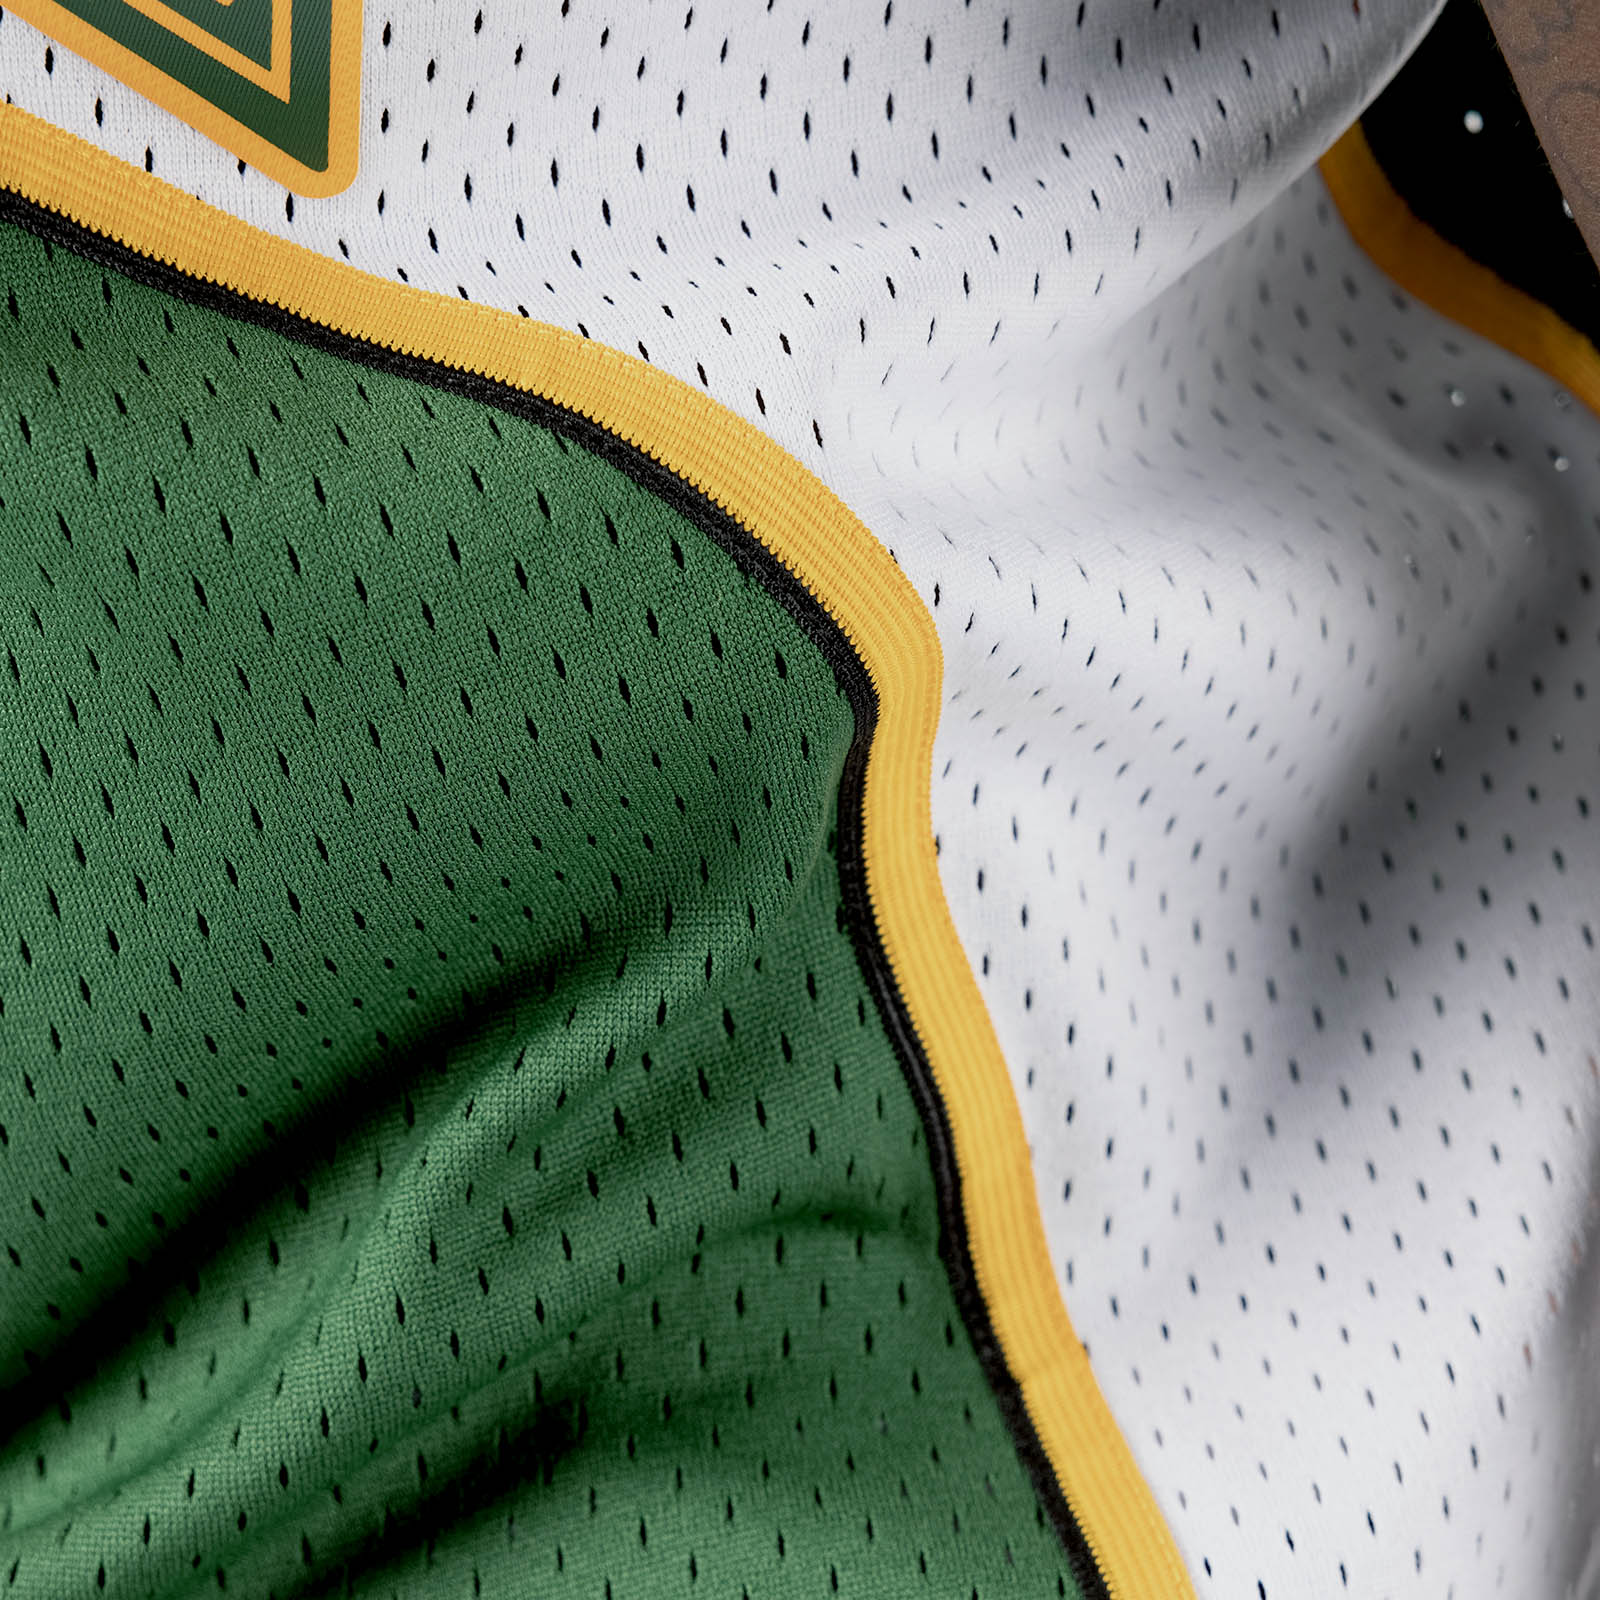 adidas Kevin Durant Seattle Supersonics Green Throwback Swingman Jersey